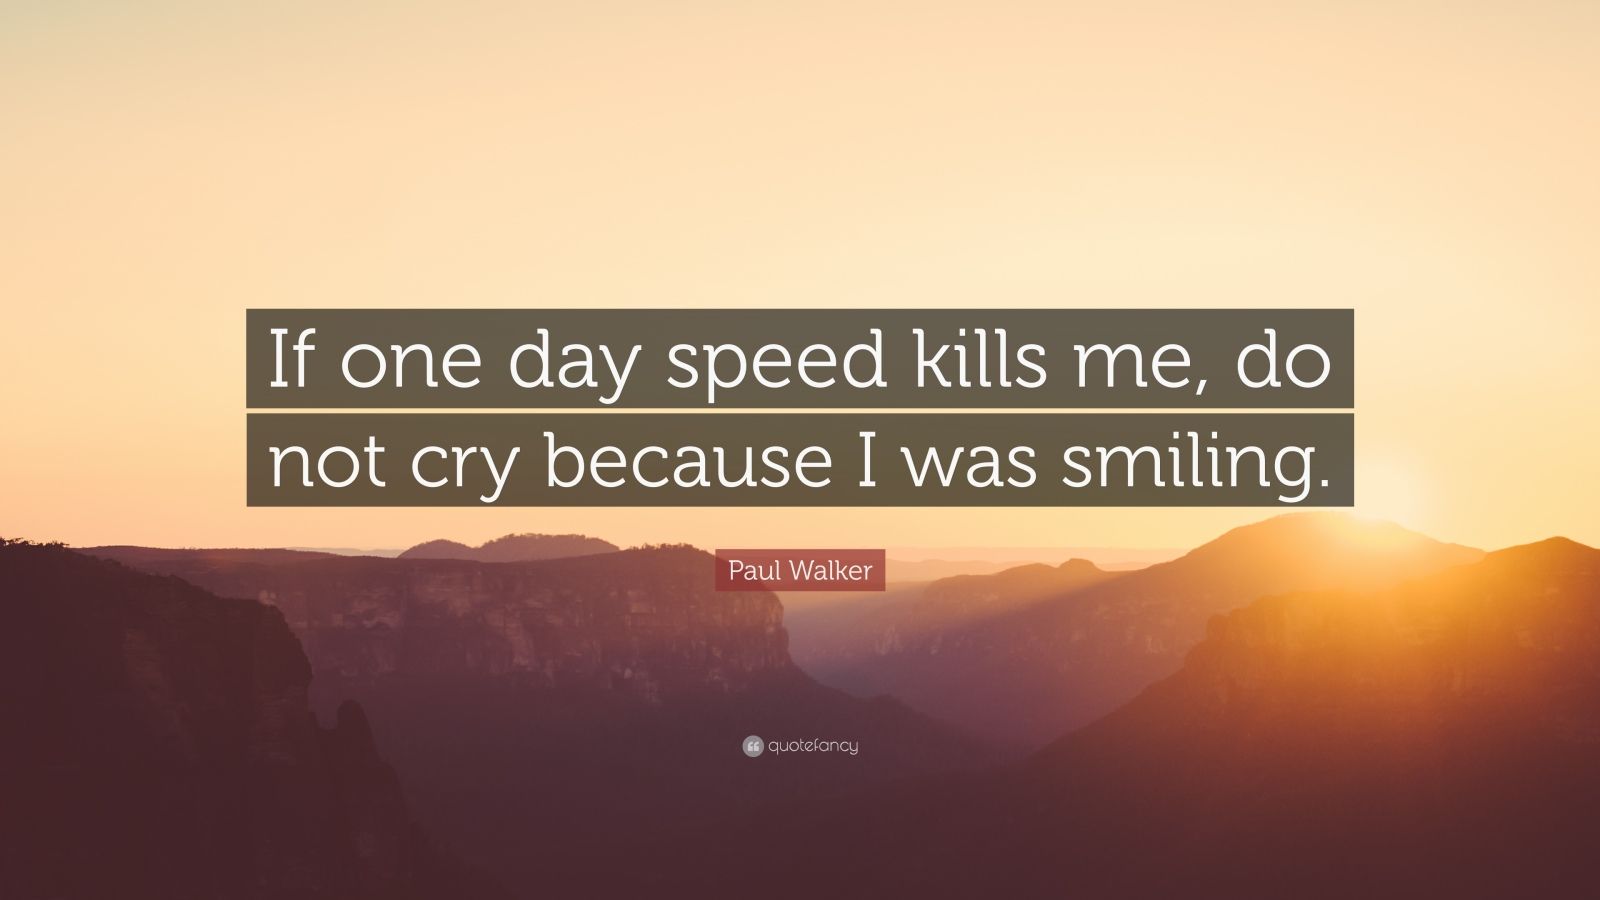 Paul Walker Quote: "If one day speed kills me, do not cry because I was smiling." (12 wallpapers ...